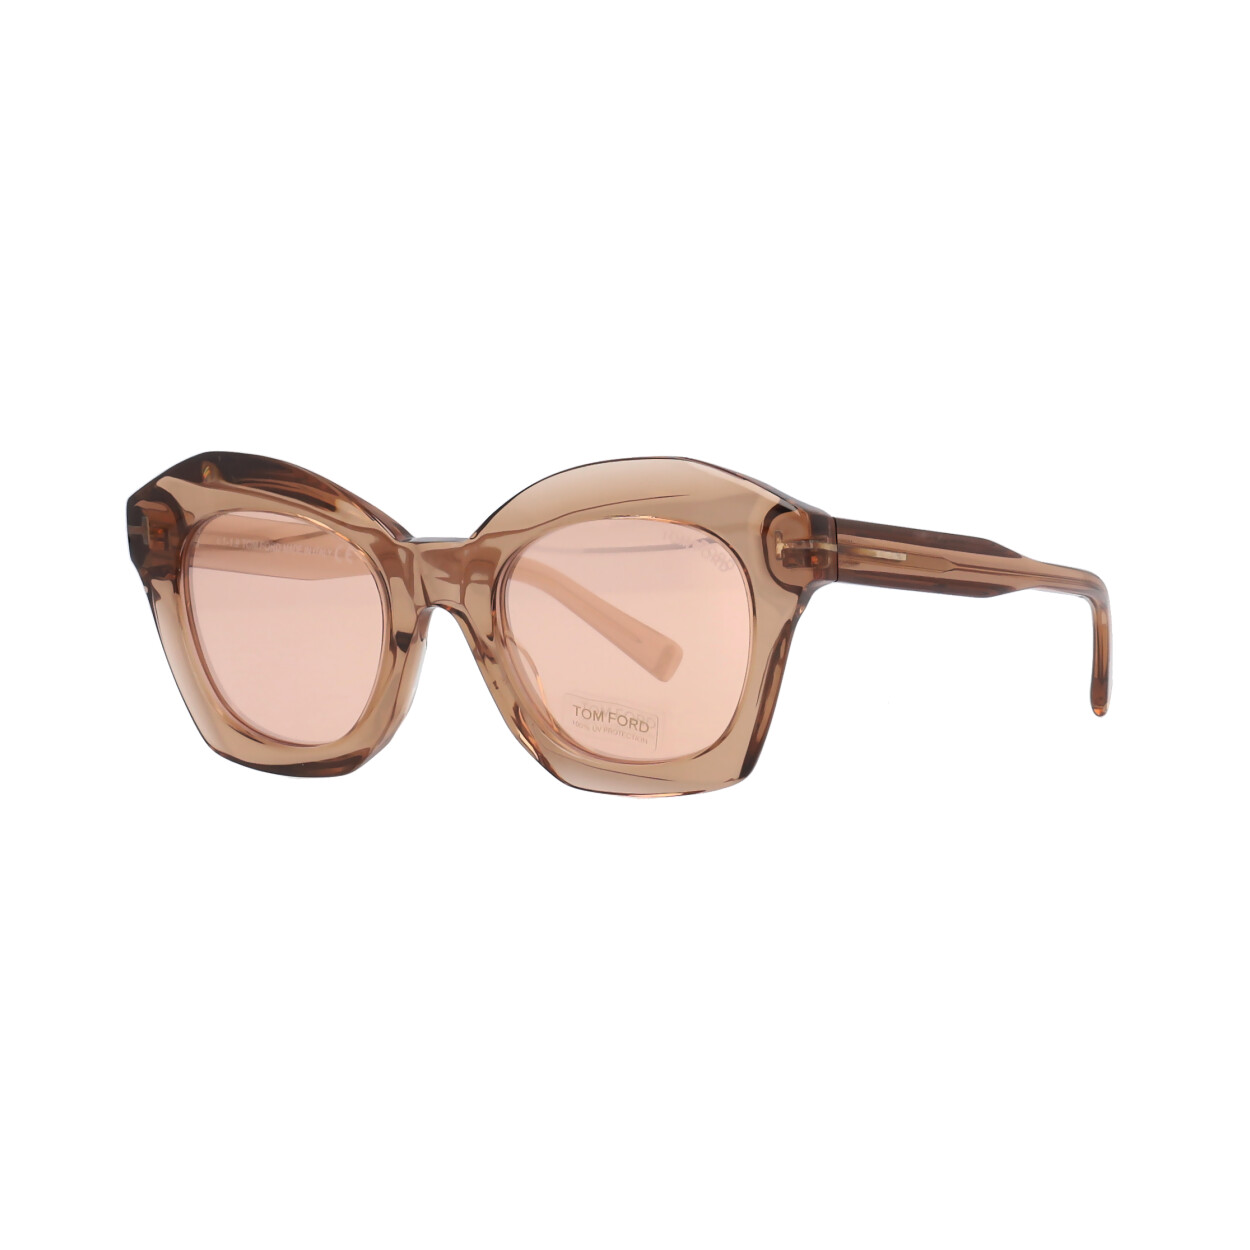 TOM FORD Bardot-02 Sunglasses TF689 Brown | Luxity